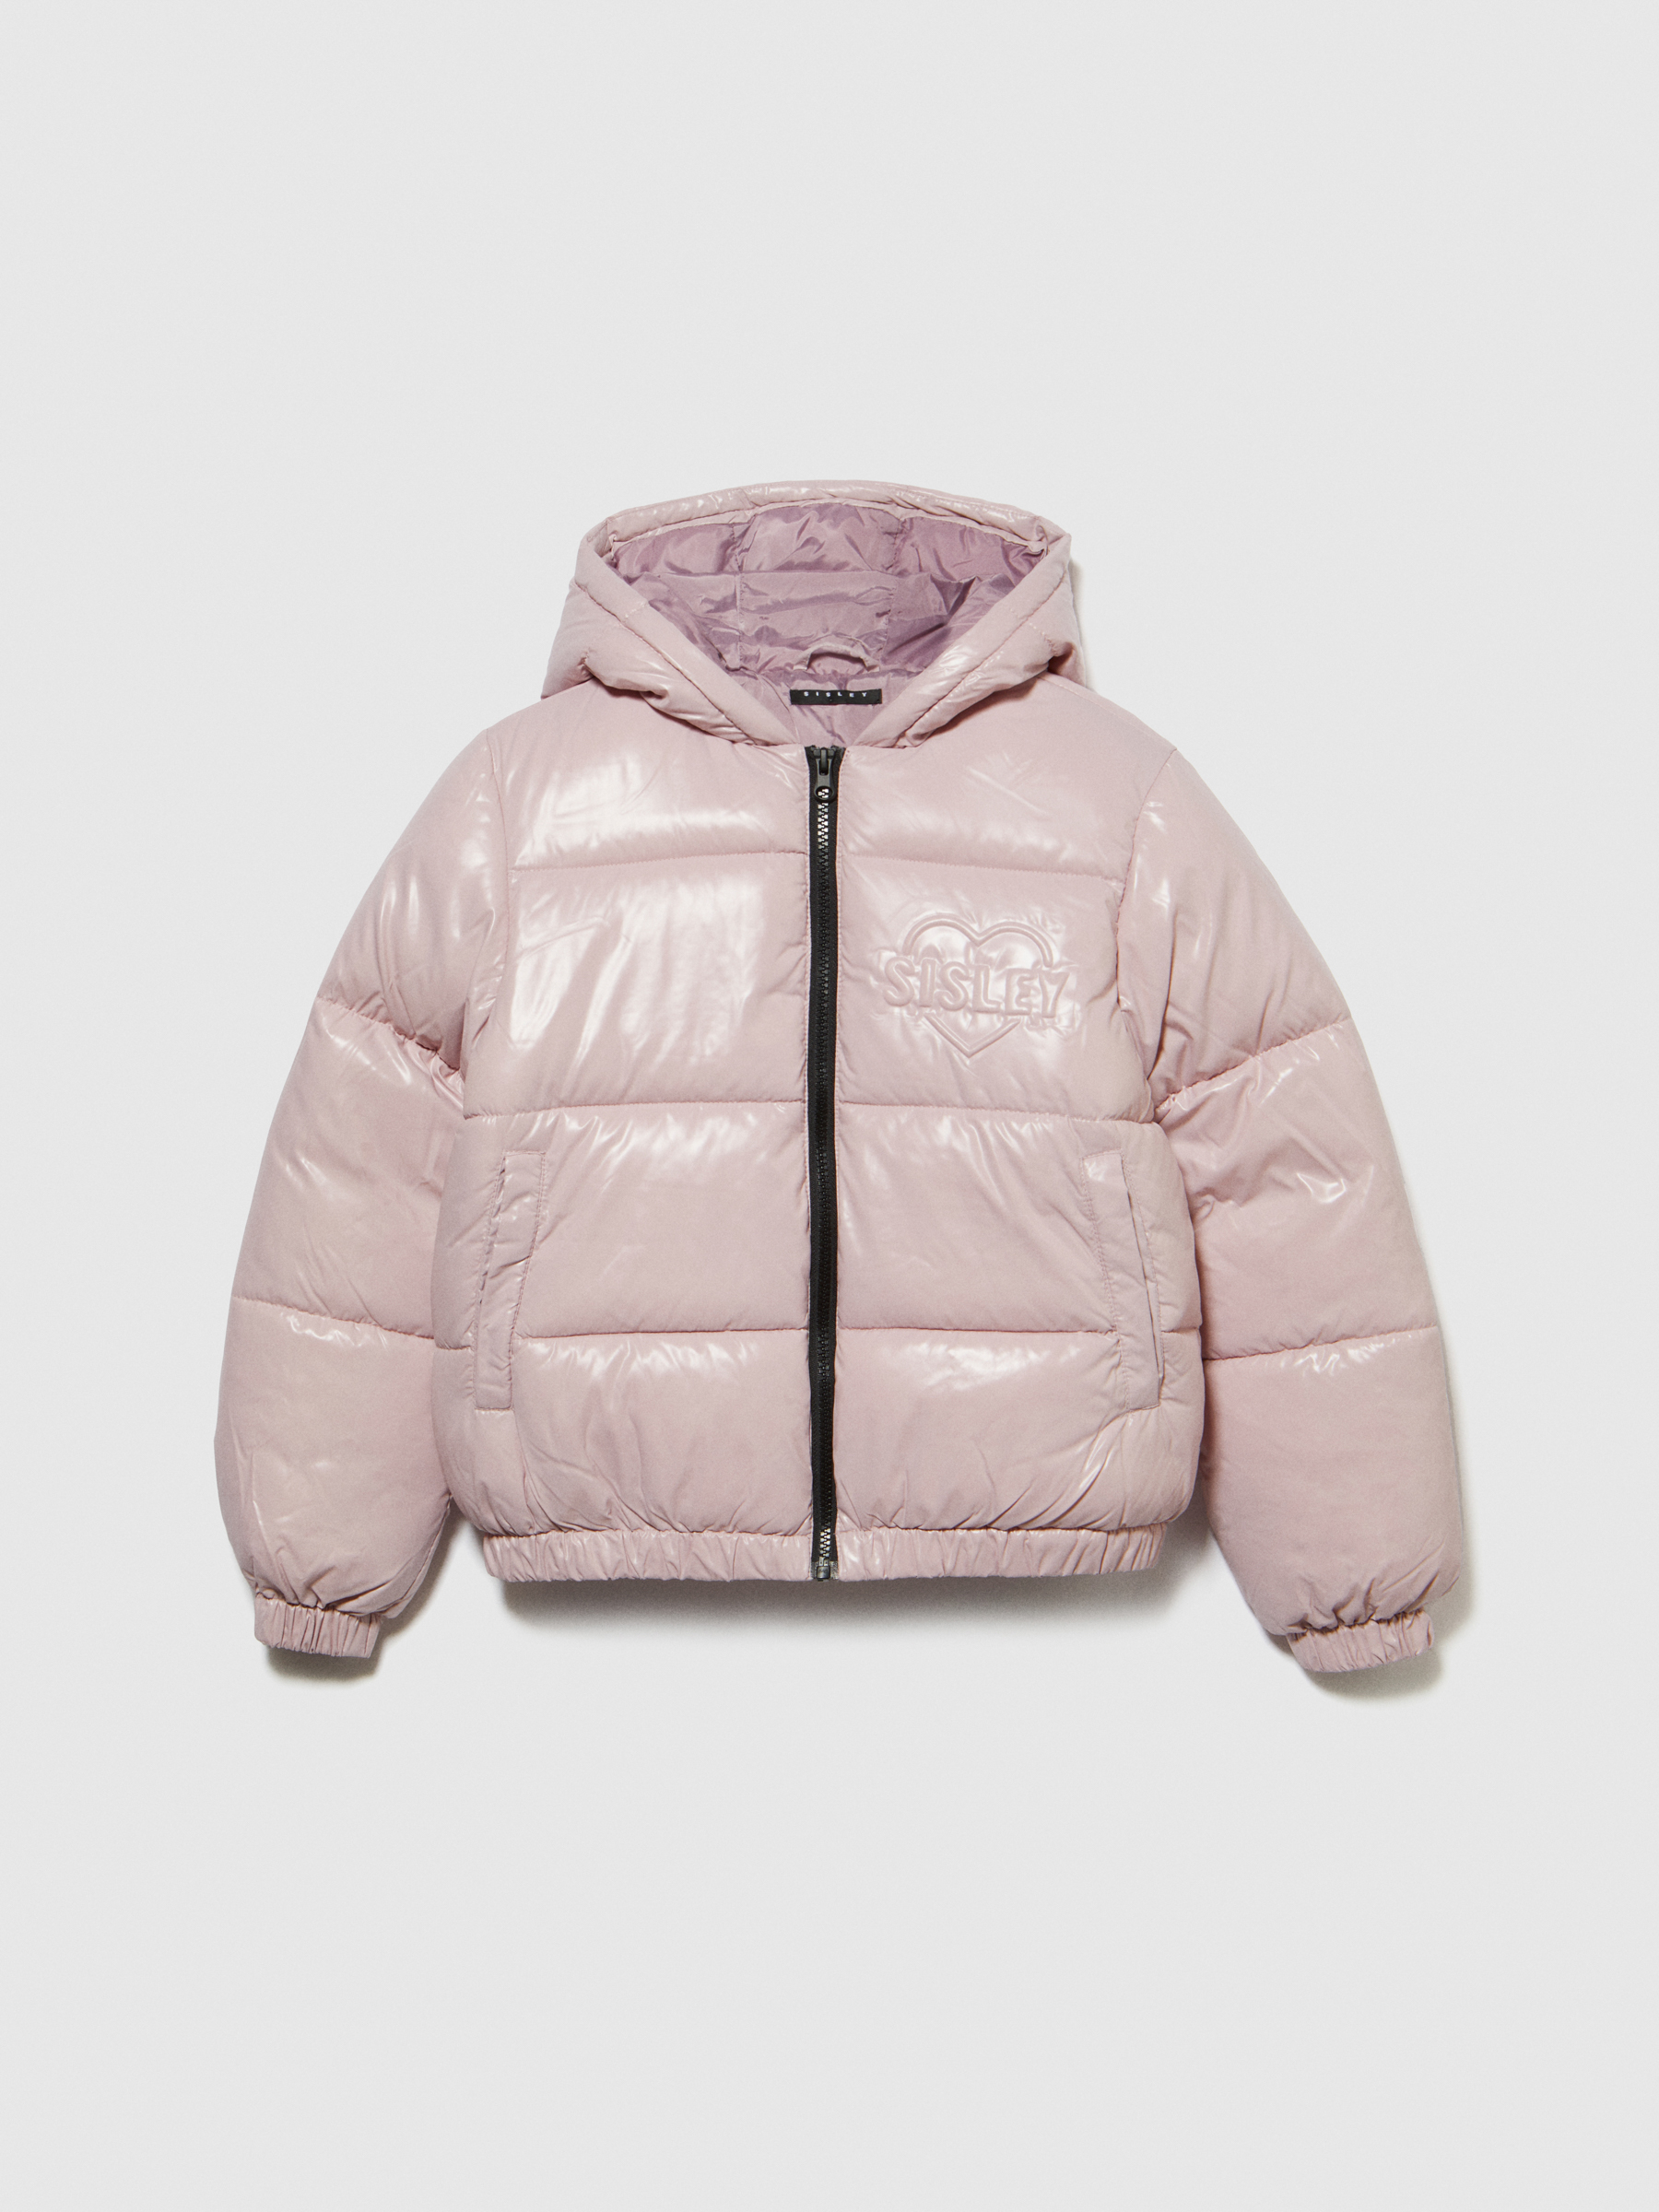 Sisley Young - Padded Jacket With Embossed Print, Woman, Pastel Pink, Size: XL